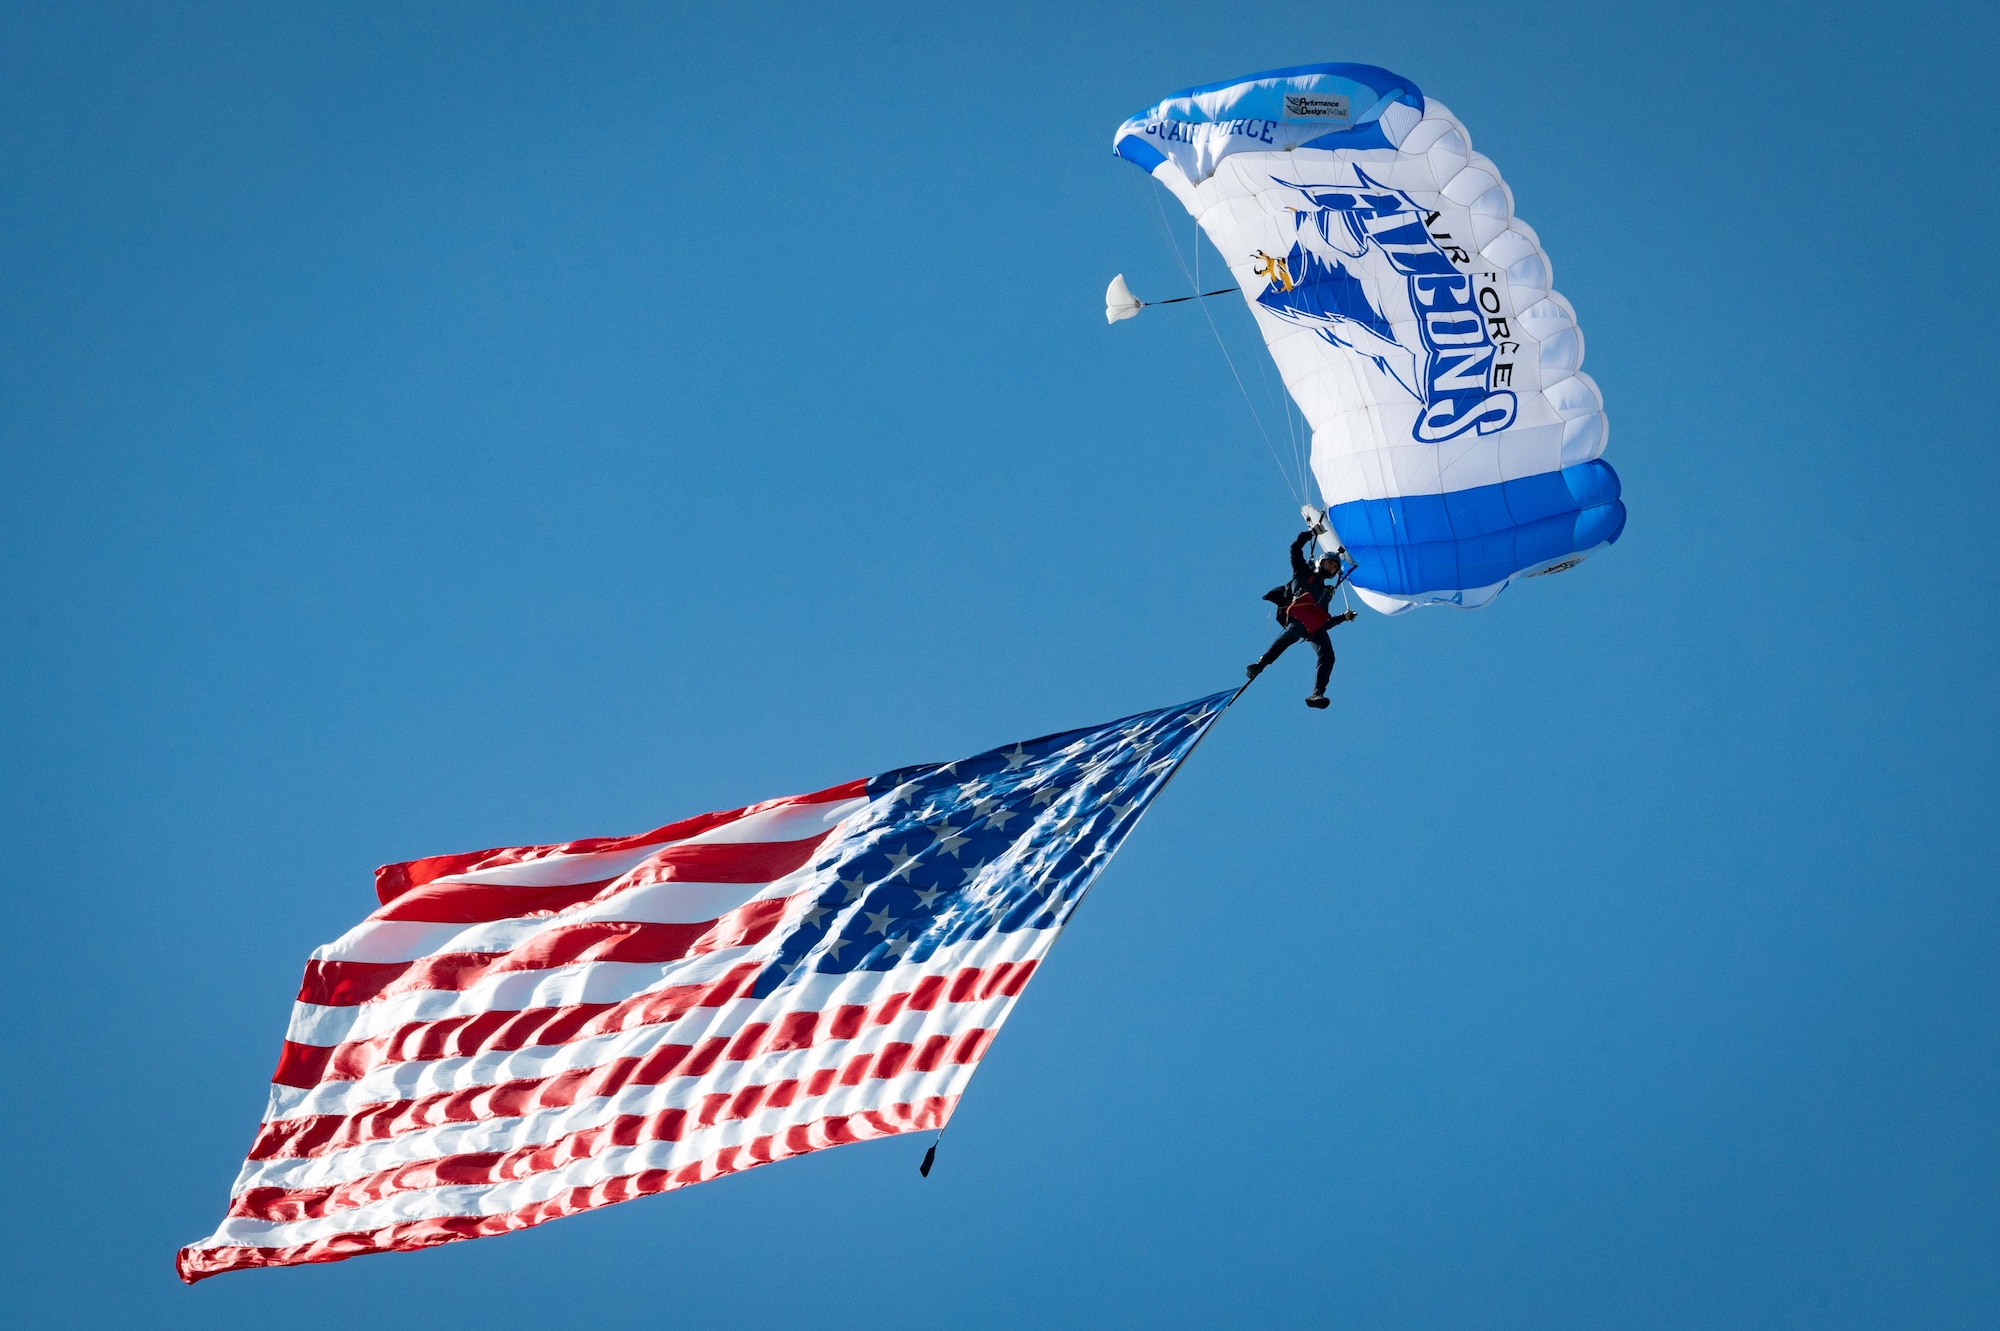 A U.S. Air Force Academy Wings of Blue parajumper glides while trailing the American flag during the 2021 Arctic Lightning Airshow at Eielson Air Force Base, Alaska, July 31, 2021.